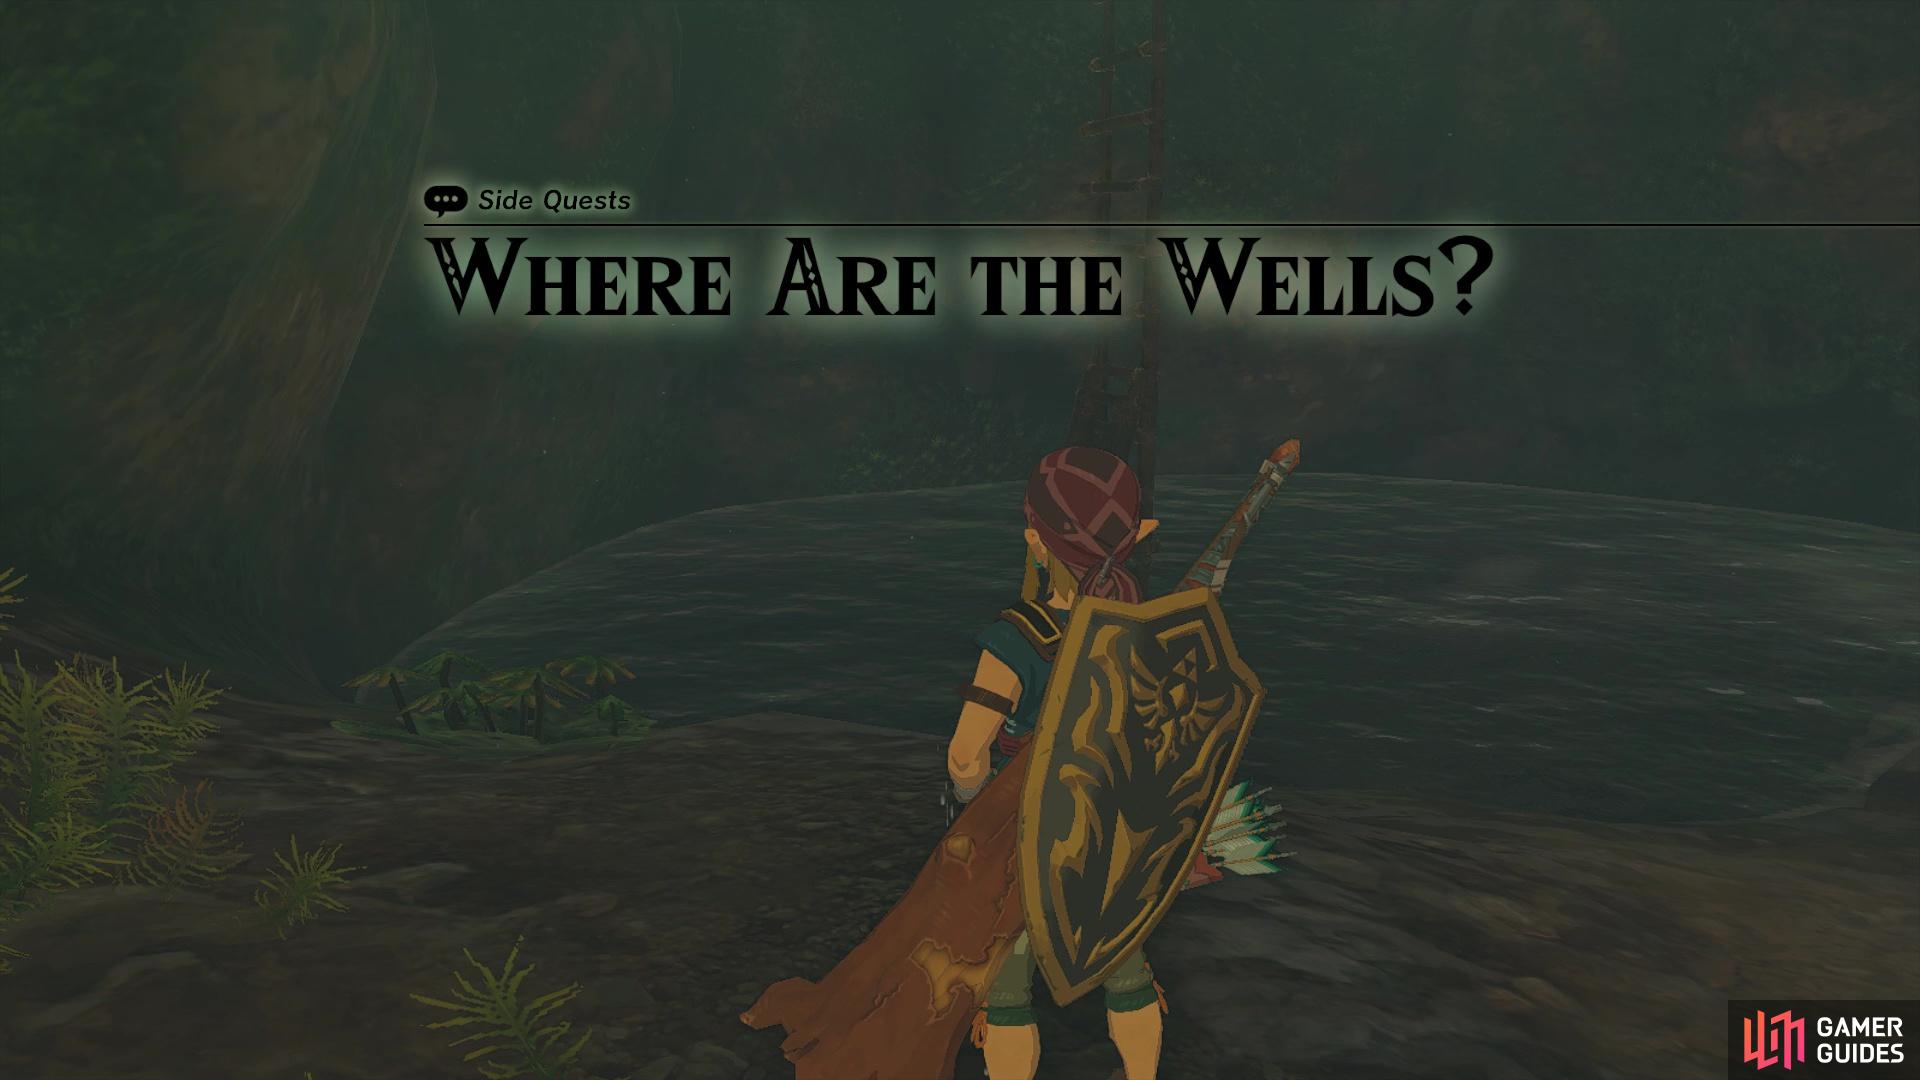 Where Are The Wells will span the game, as you need to find all 58 wells.